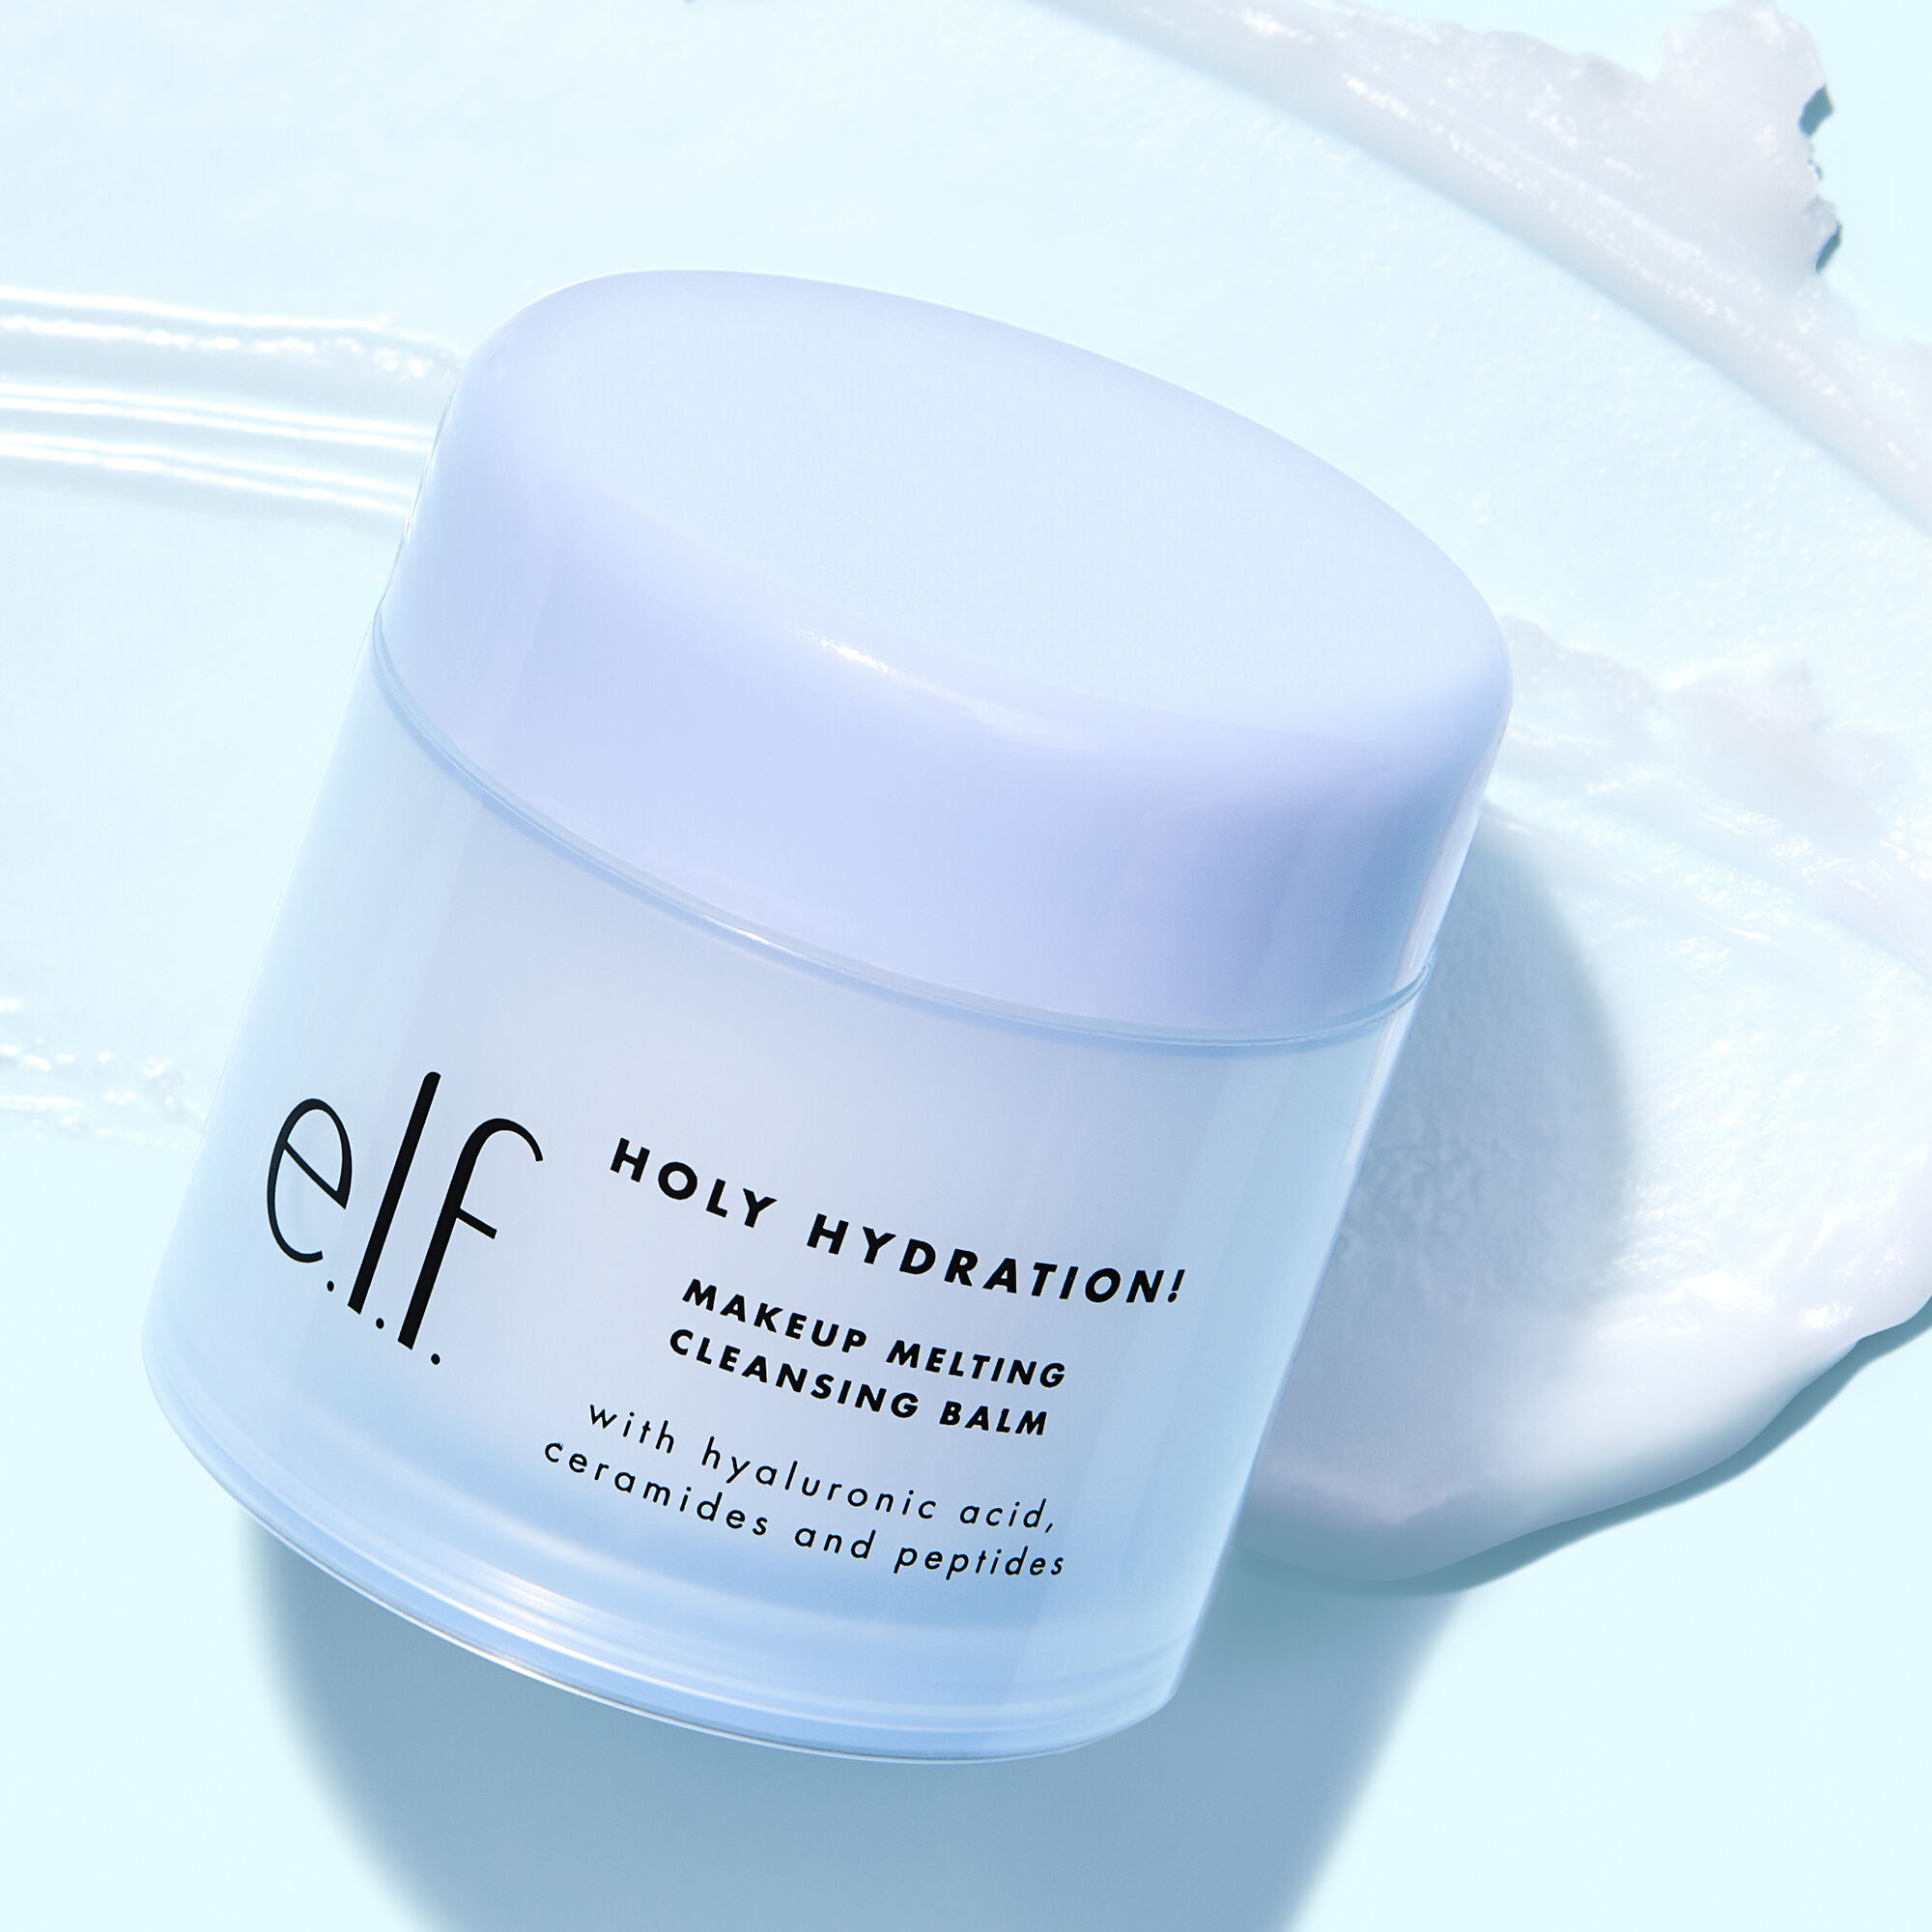 Holy Hydration! Makeup Cleansing Balm | e.l.f. Cosmetics UK